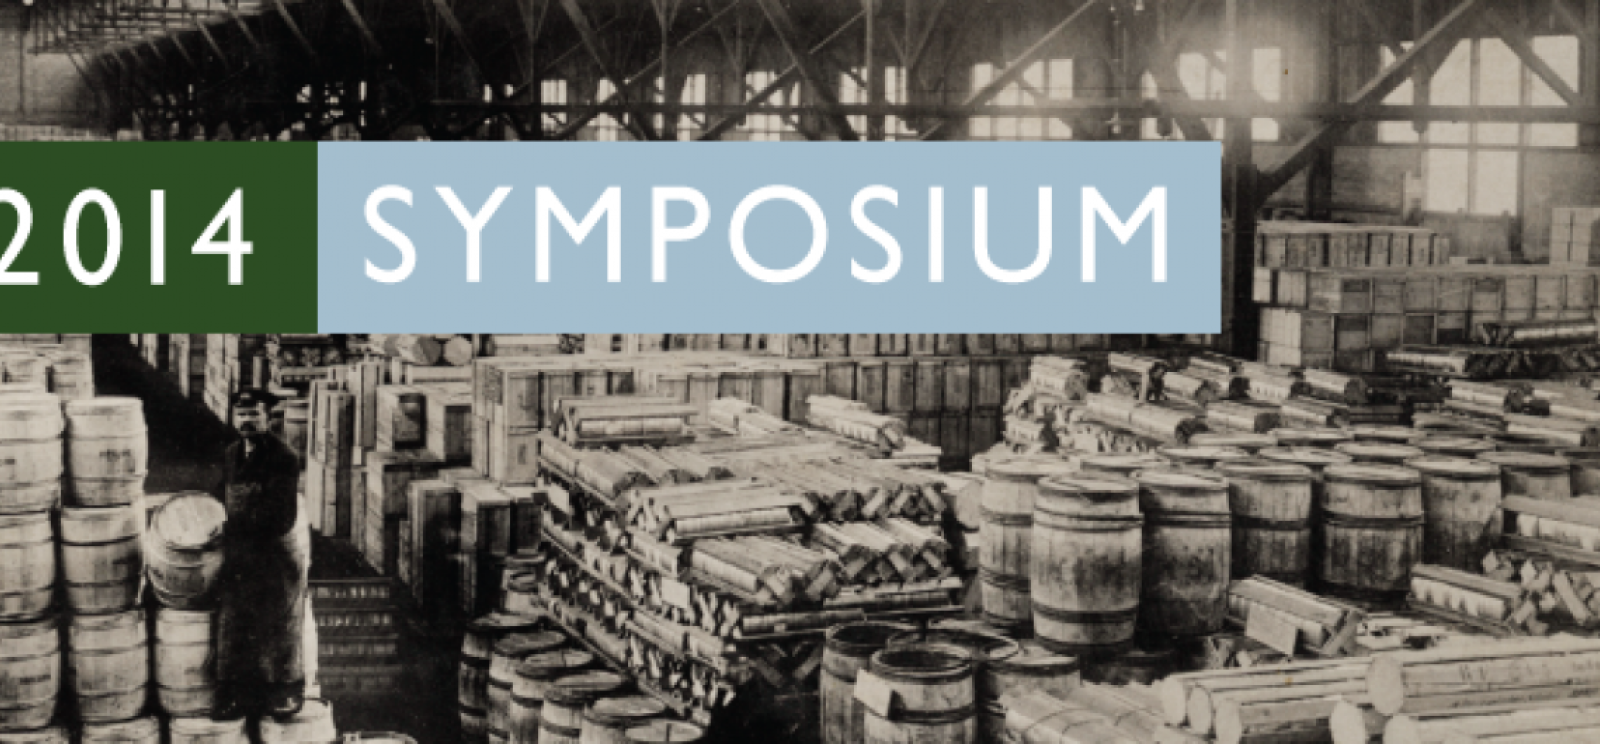 Background image: black and white photograph of pallets and barrels of supplies stacked in rows stretching away from the viewer. Text: 2014 Symposium